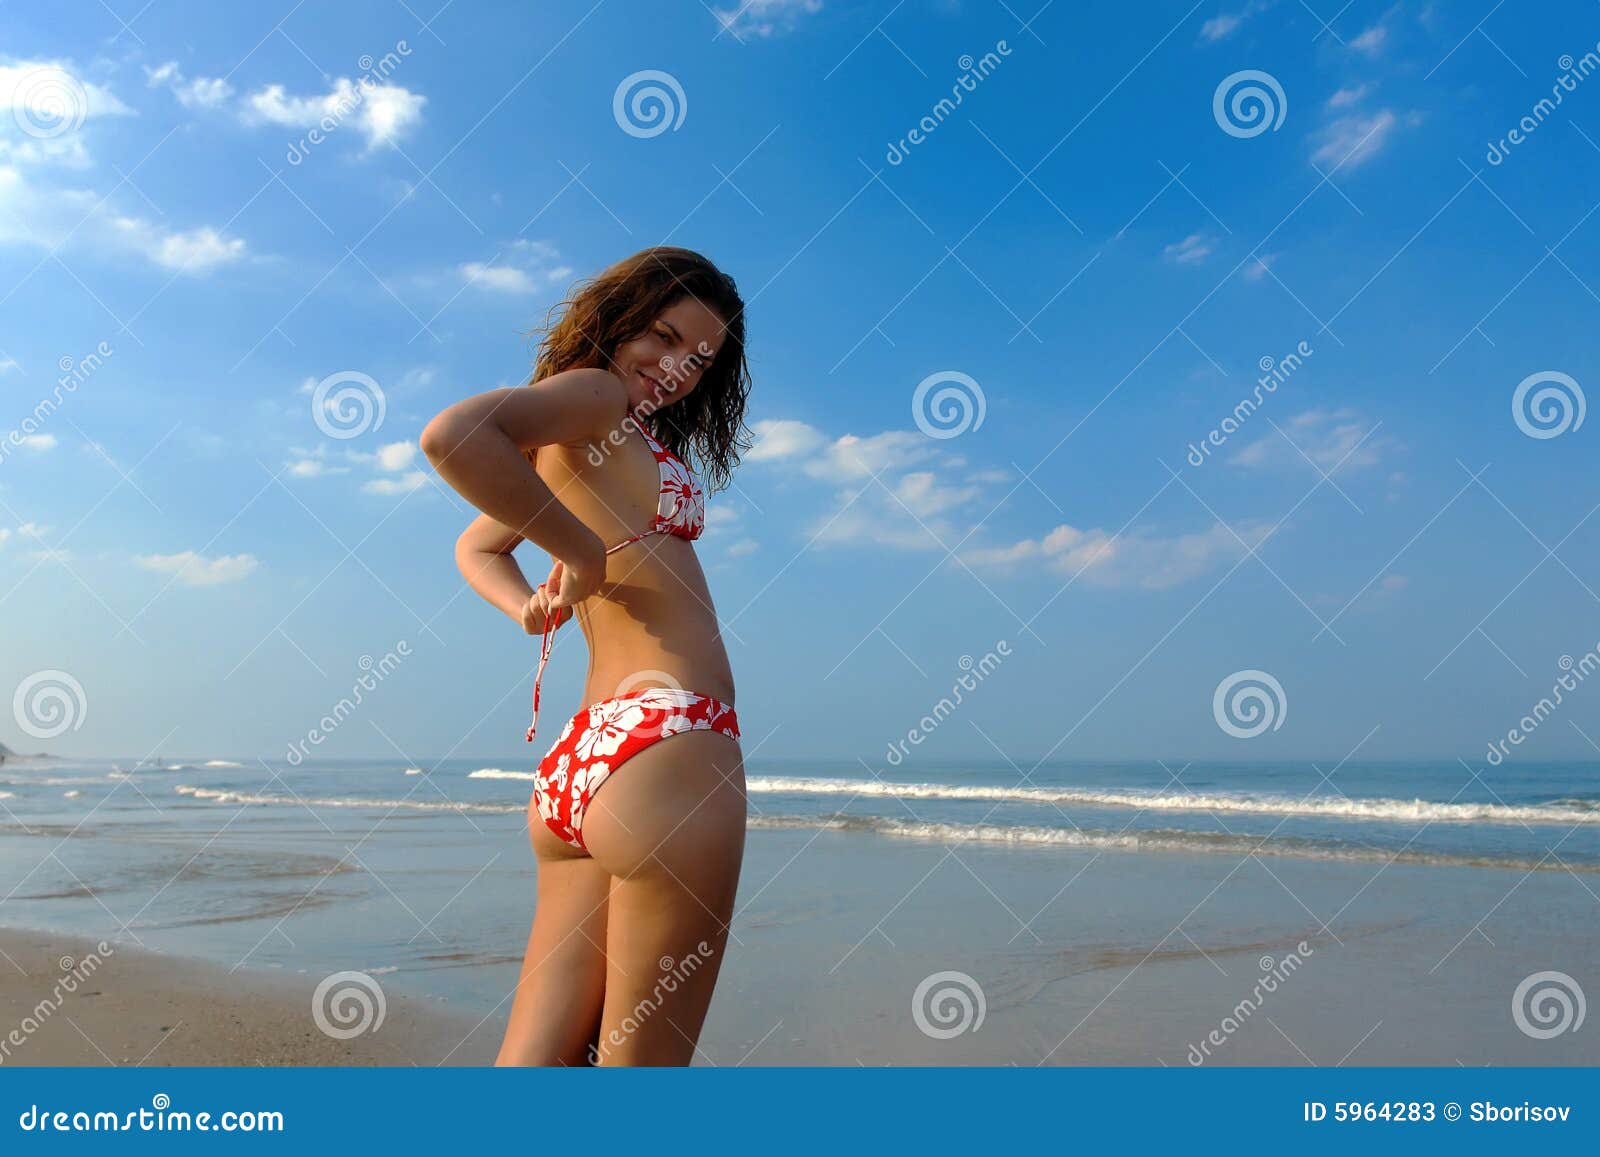 Beautiful Girl on the Beach Stock Image pic picture